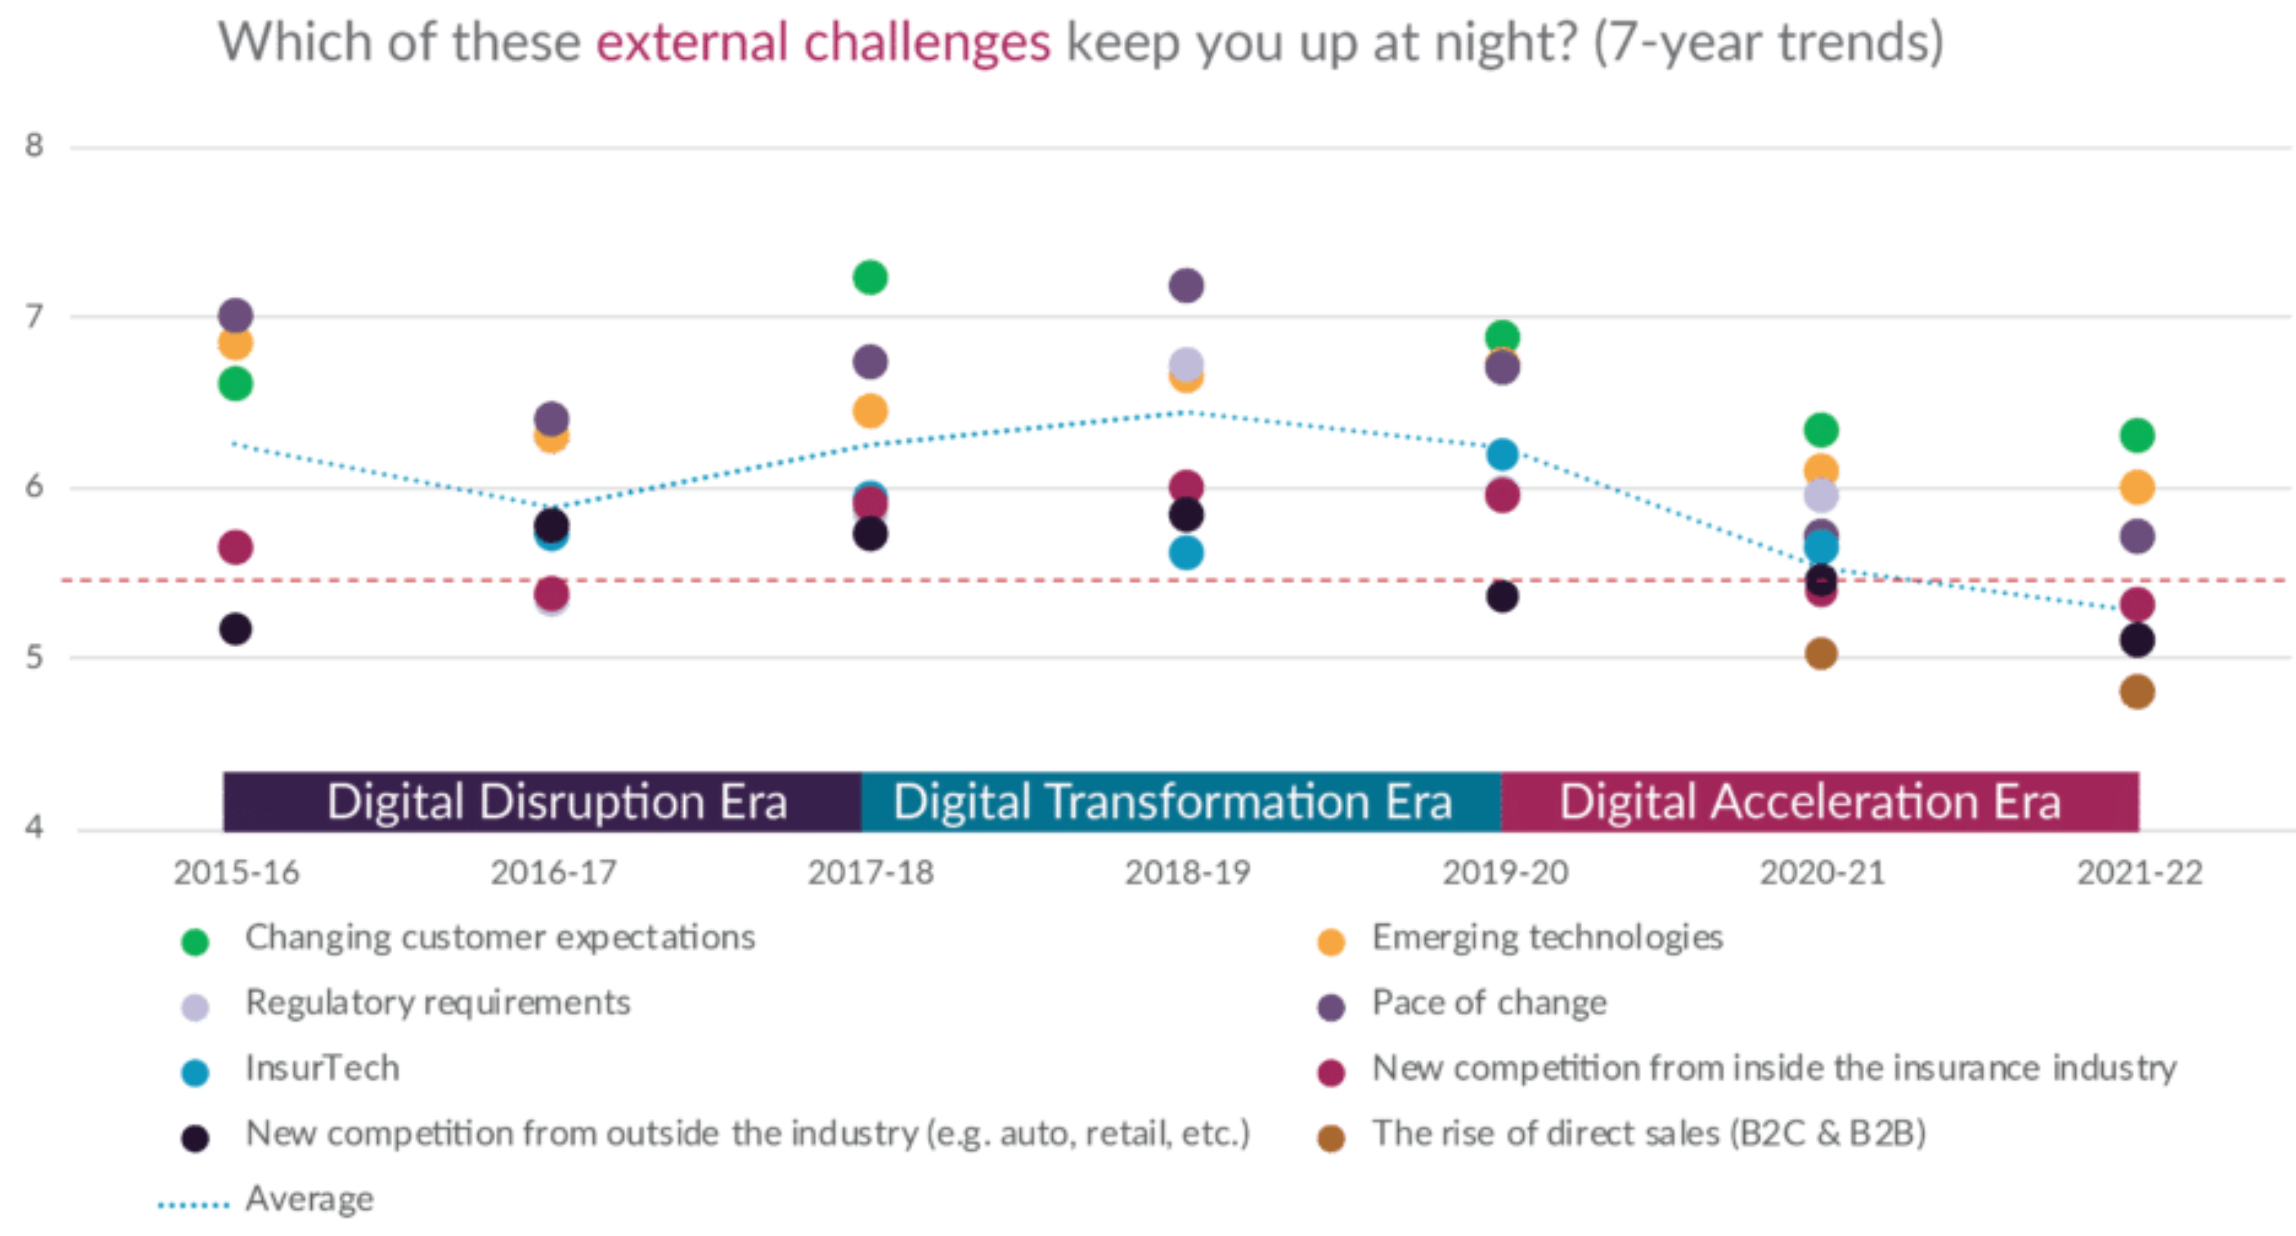 Seven-year trends in concerns about external challenges